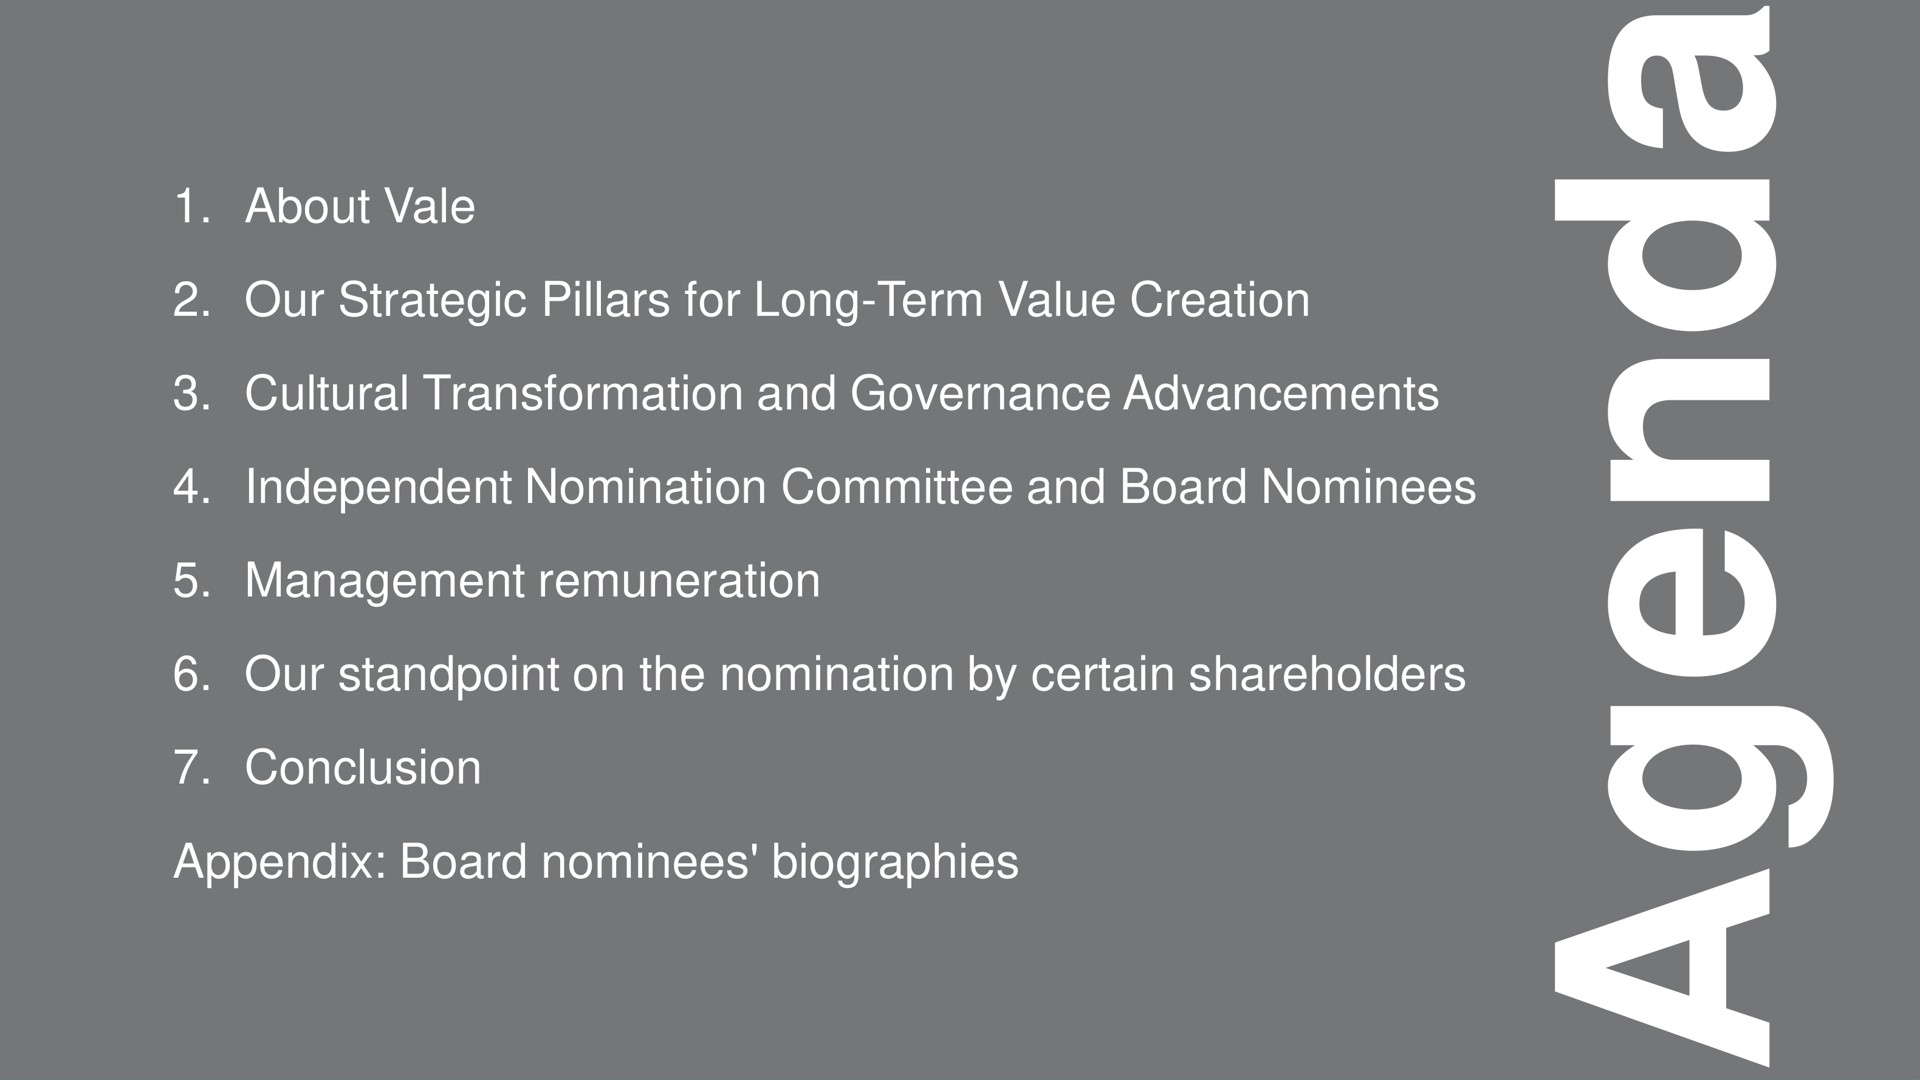 a a about vale our strategic pillars for long term value creation cultural transformation and governance advancements independent nomination committee and board nominees management remuneration our standpoint on the nomination by certain shareholders conclusion appendix board nominees biographies | Vale